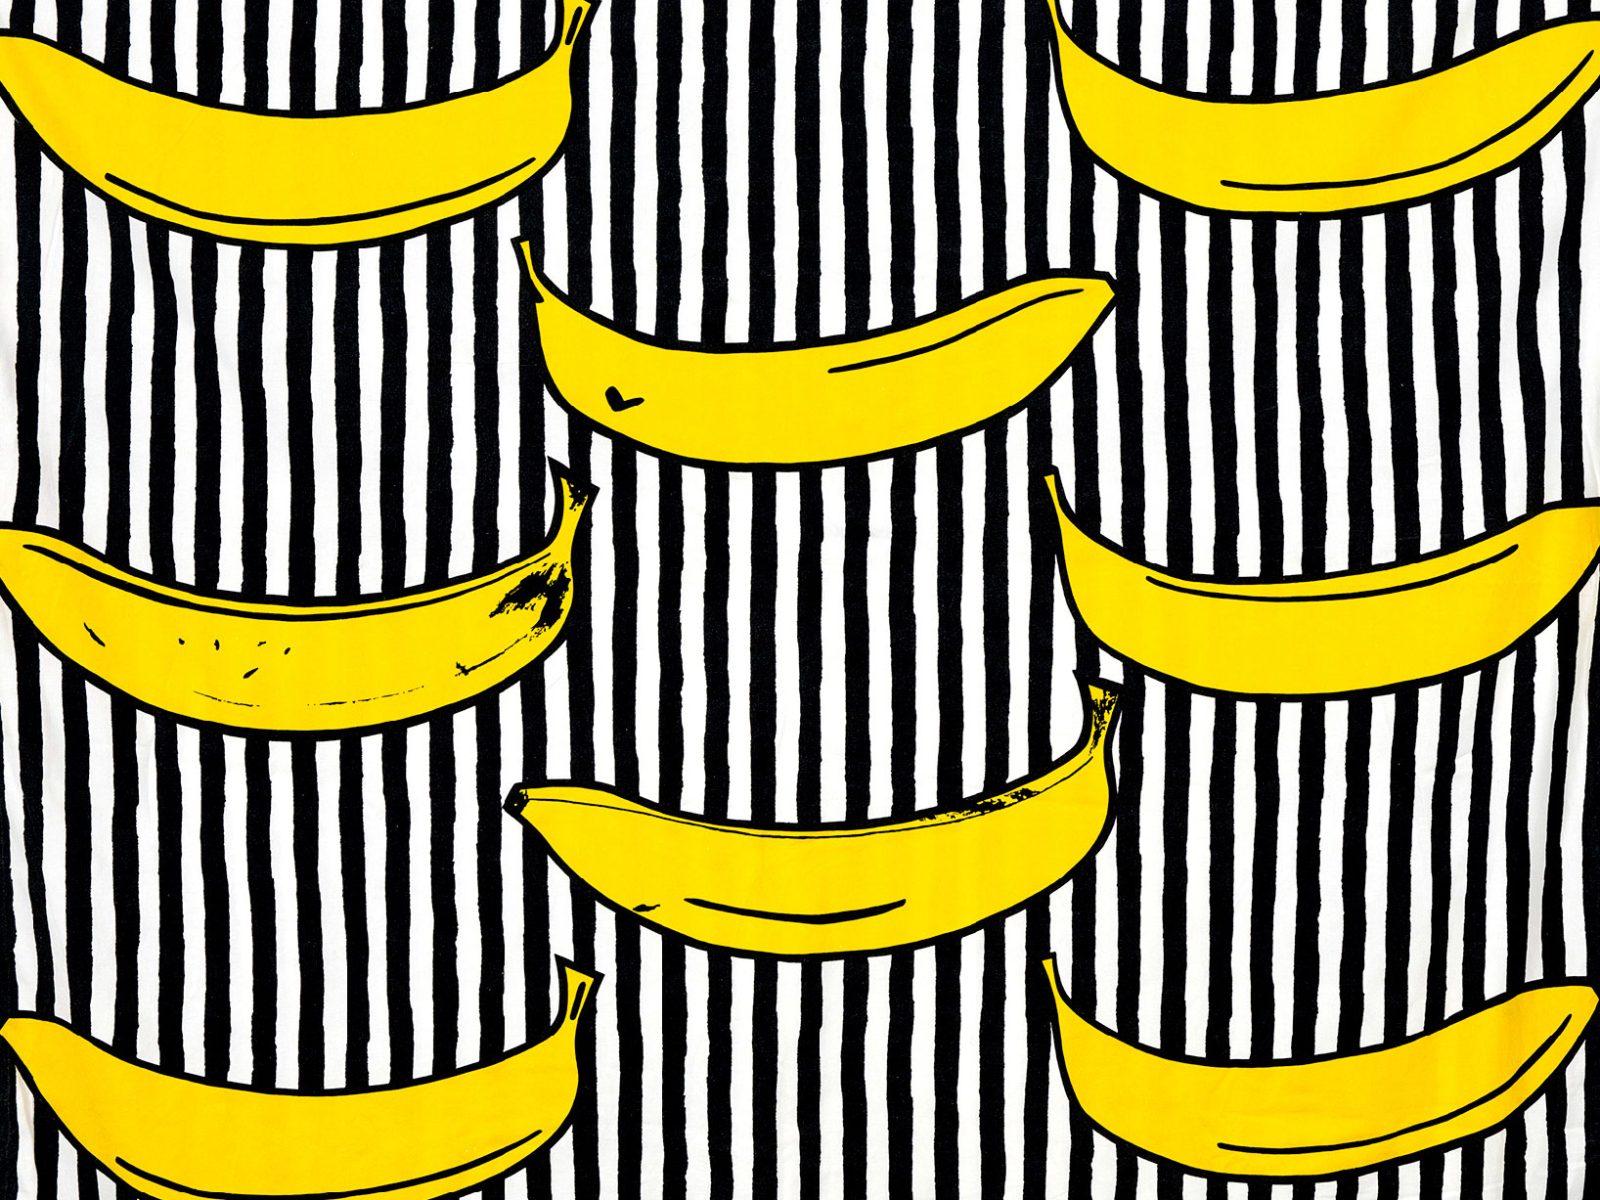 Textile pattern with yellow bananas on a black-and-white striped background.